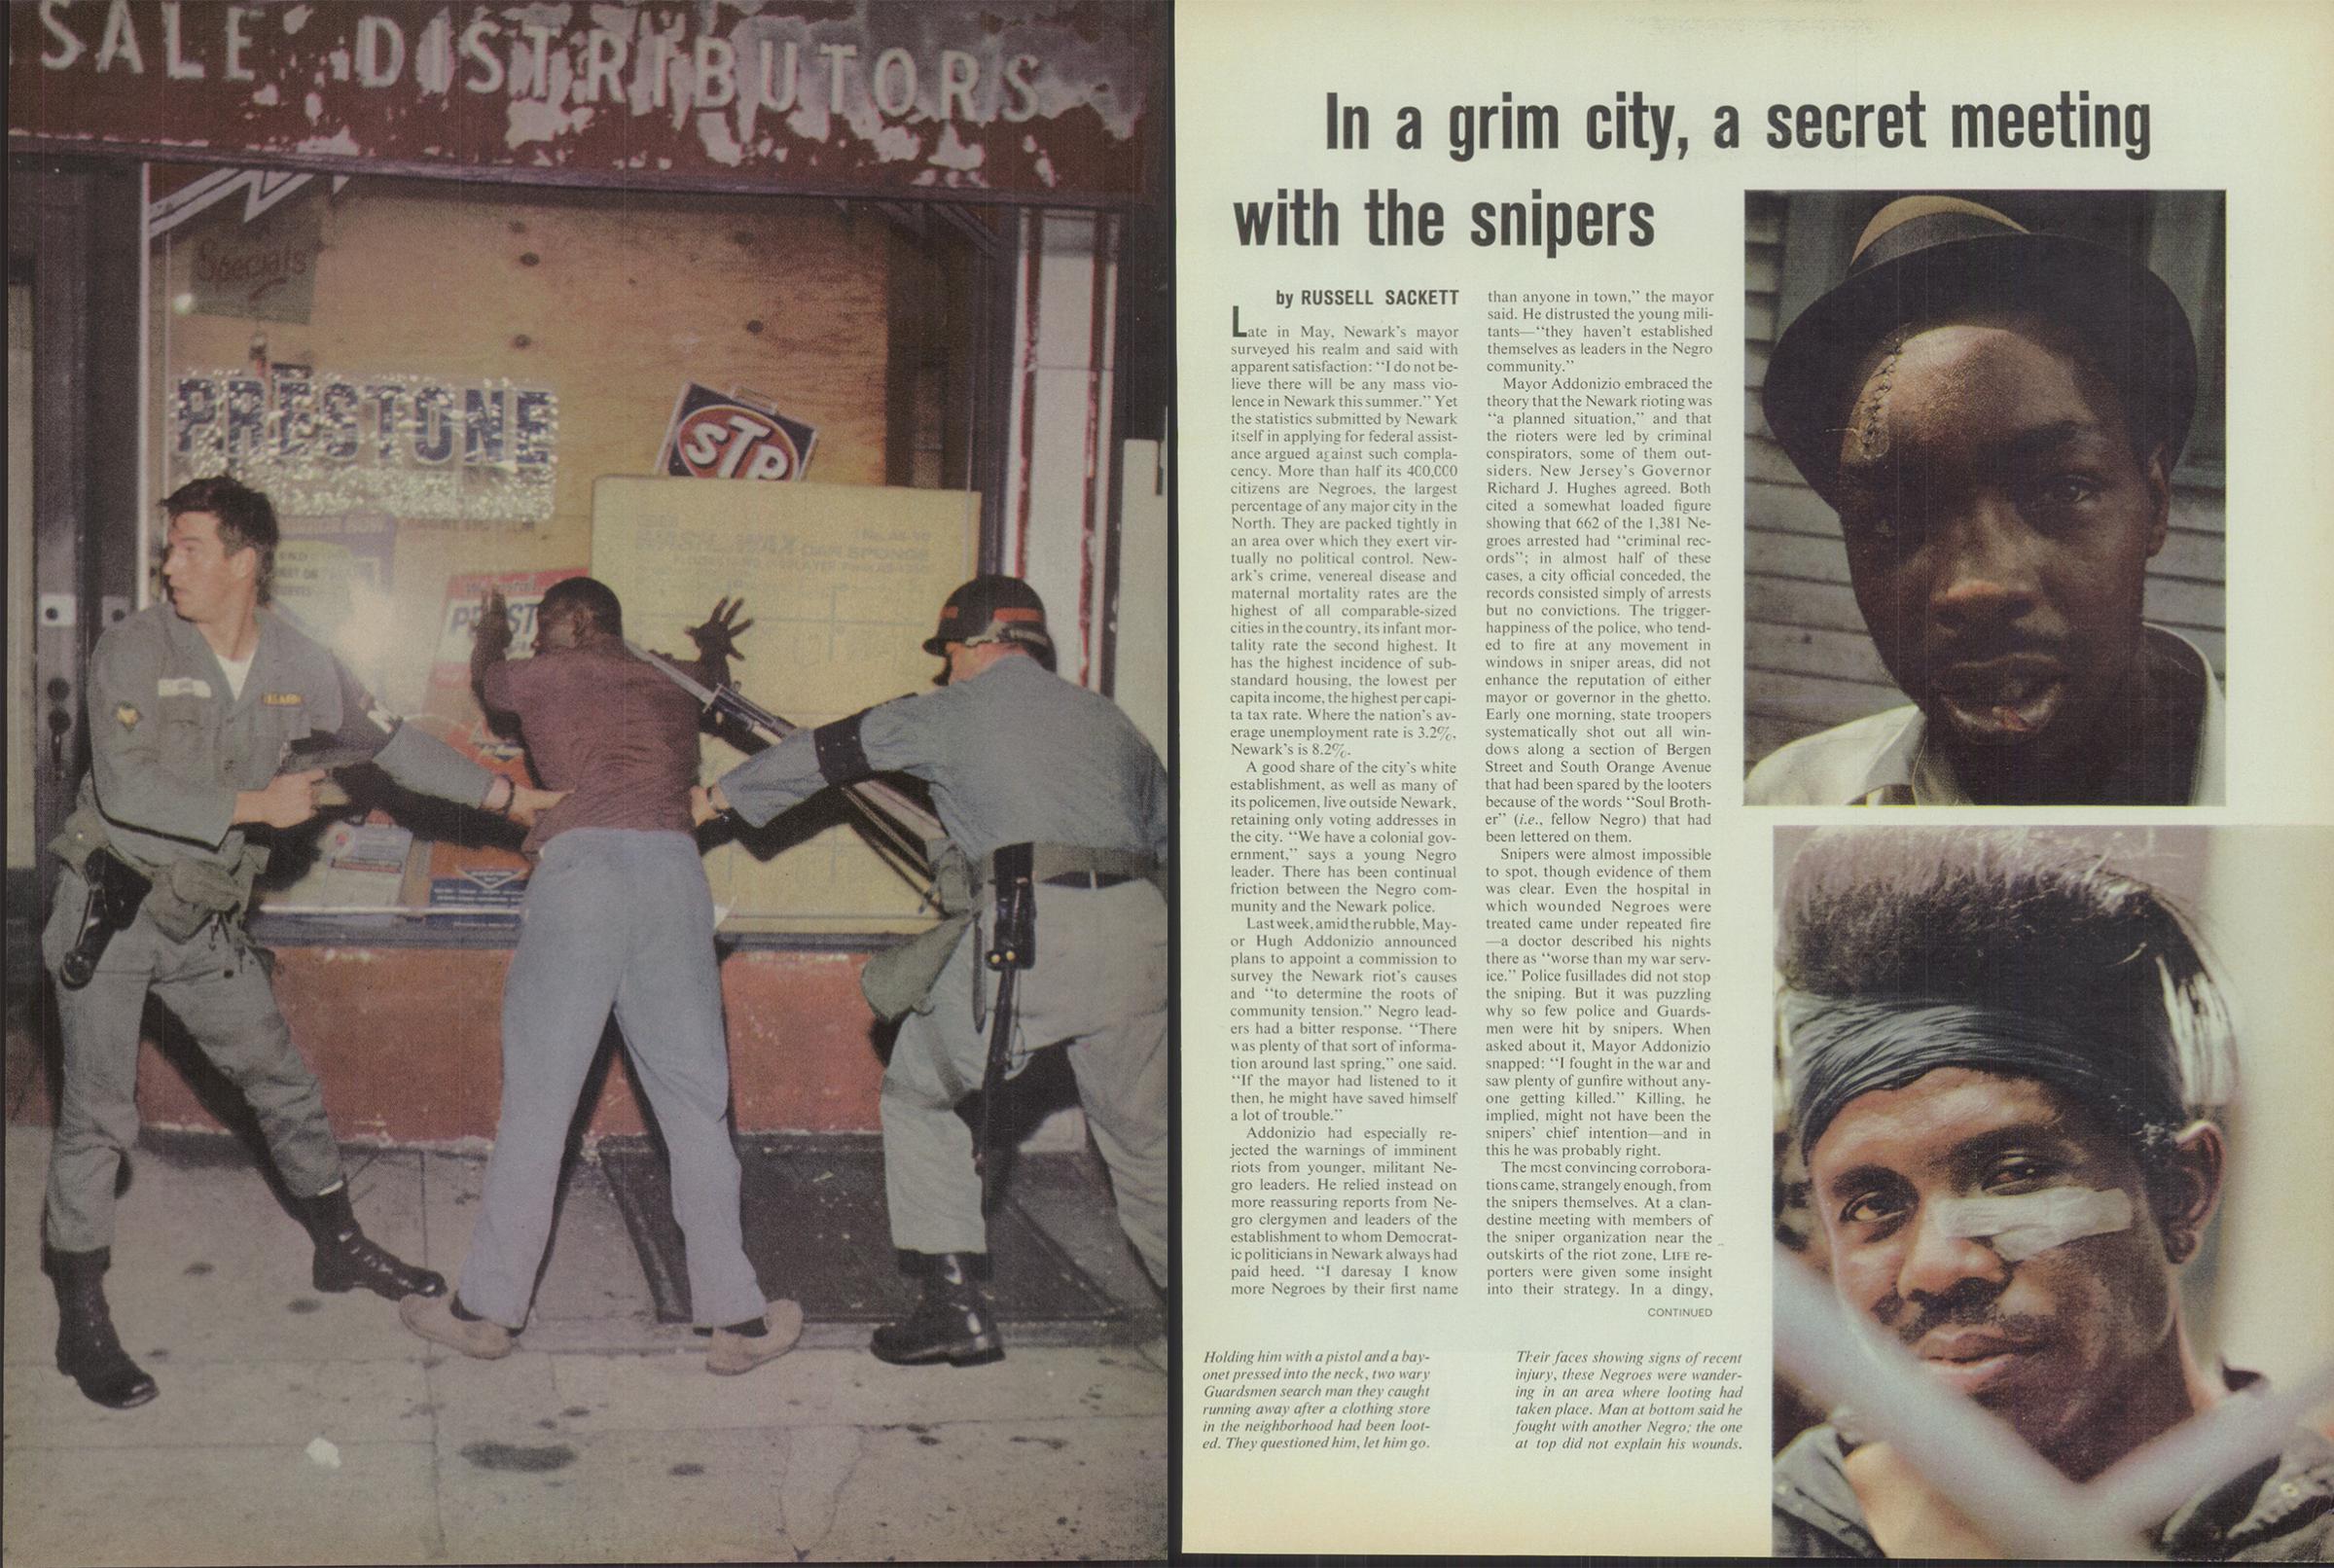 LIFE coverage of the Newark riots from the July 28, 1967 issue. Photos by Frank Dandridge and Bud Lee.